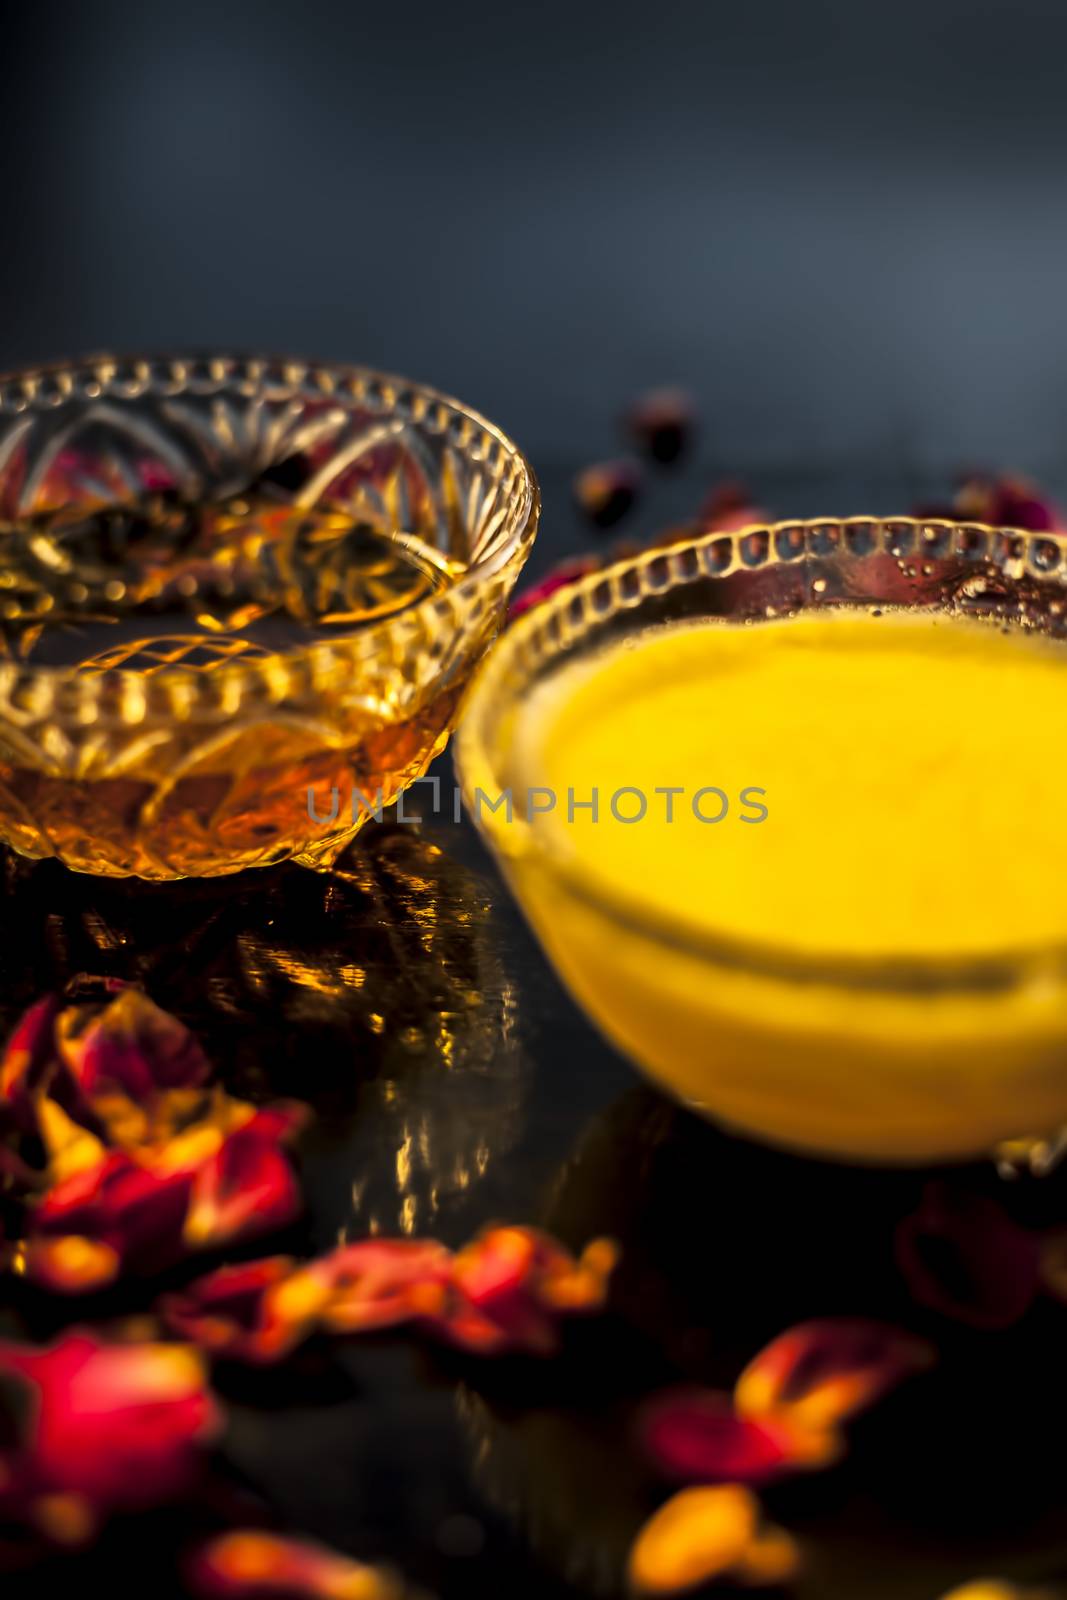 Ayurvedic moisturizer face mask on black glossy surface in a glass bowl with some ghee or clarified butter, honey and pack.